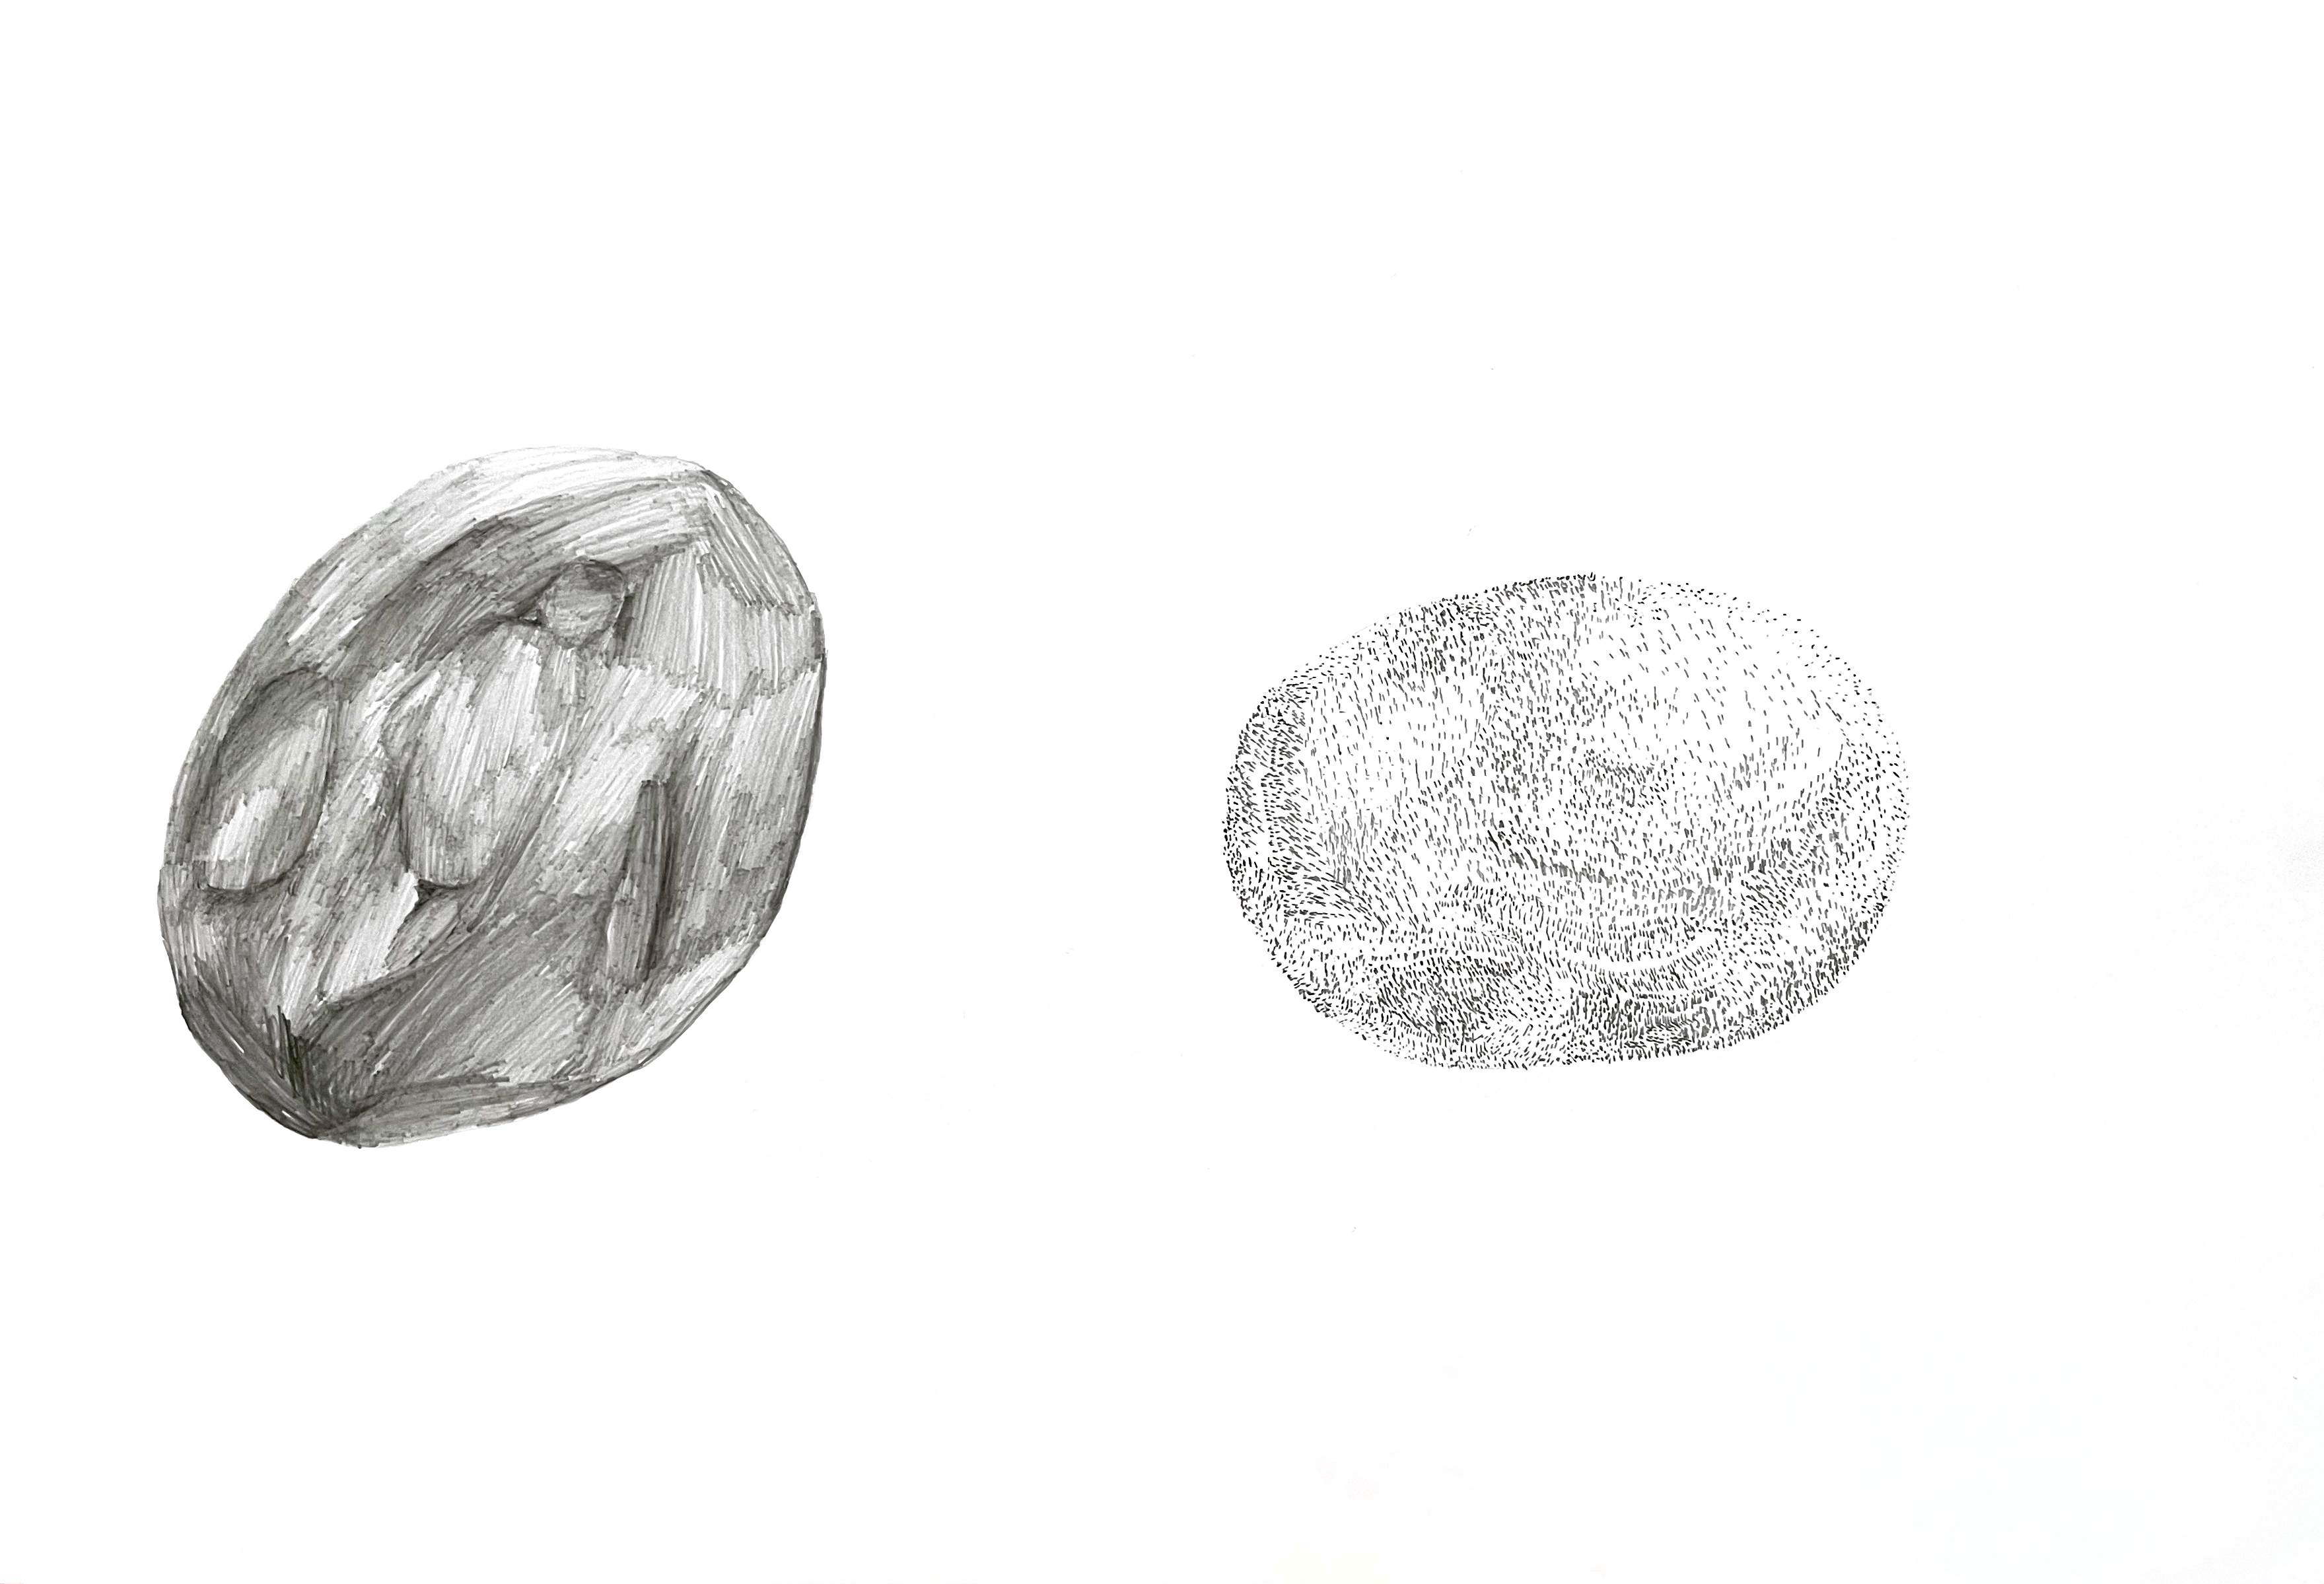 two stones drawn in pencil, the left drawn heavily shaded with different facets, the right stippled with small dark dots and mini lines